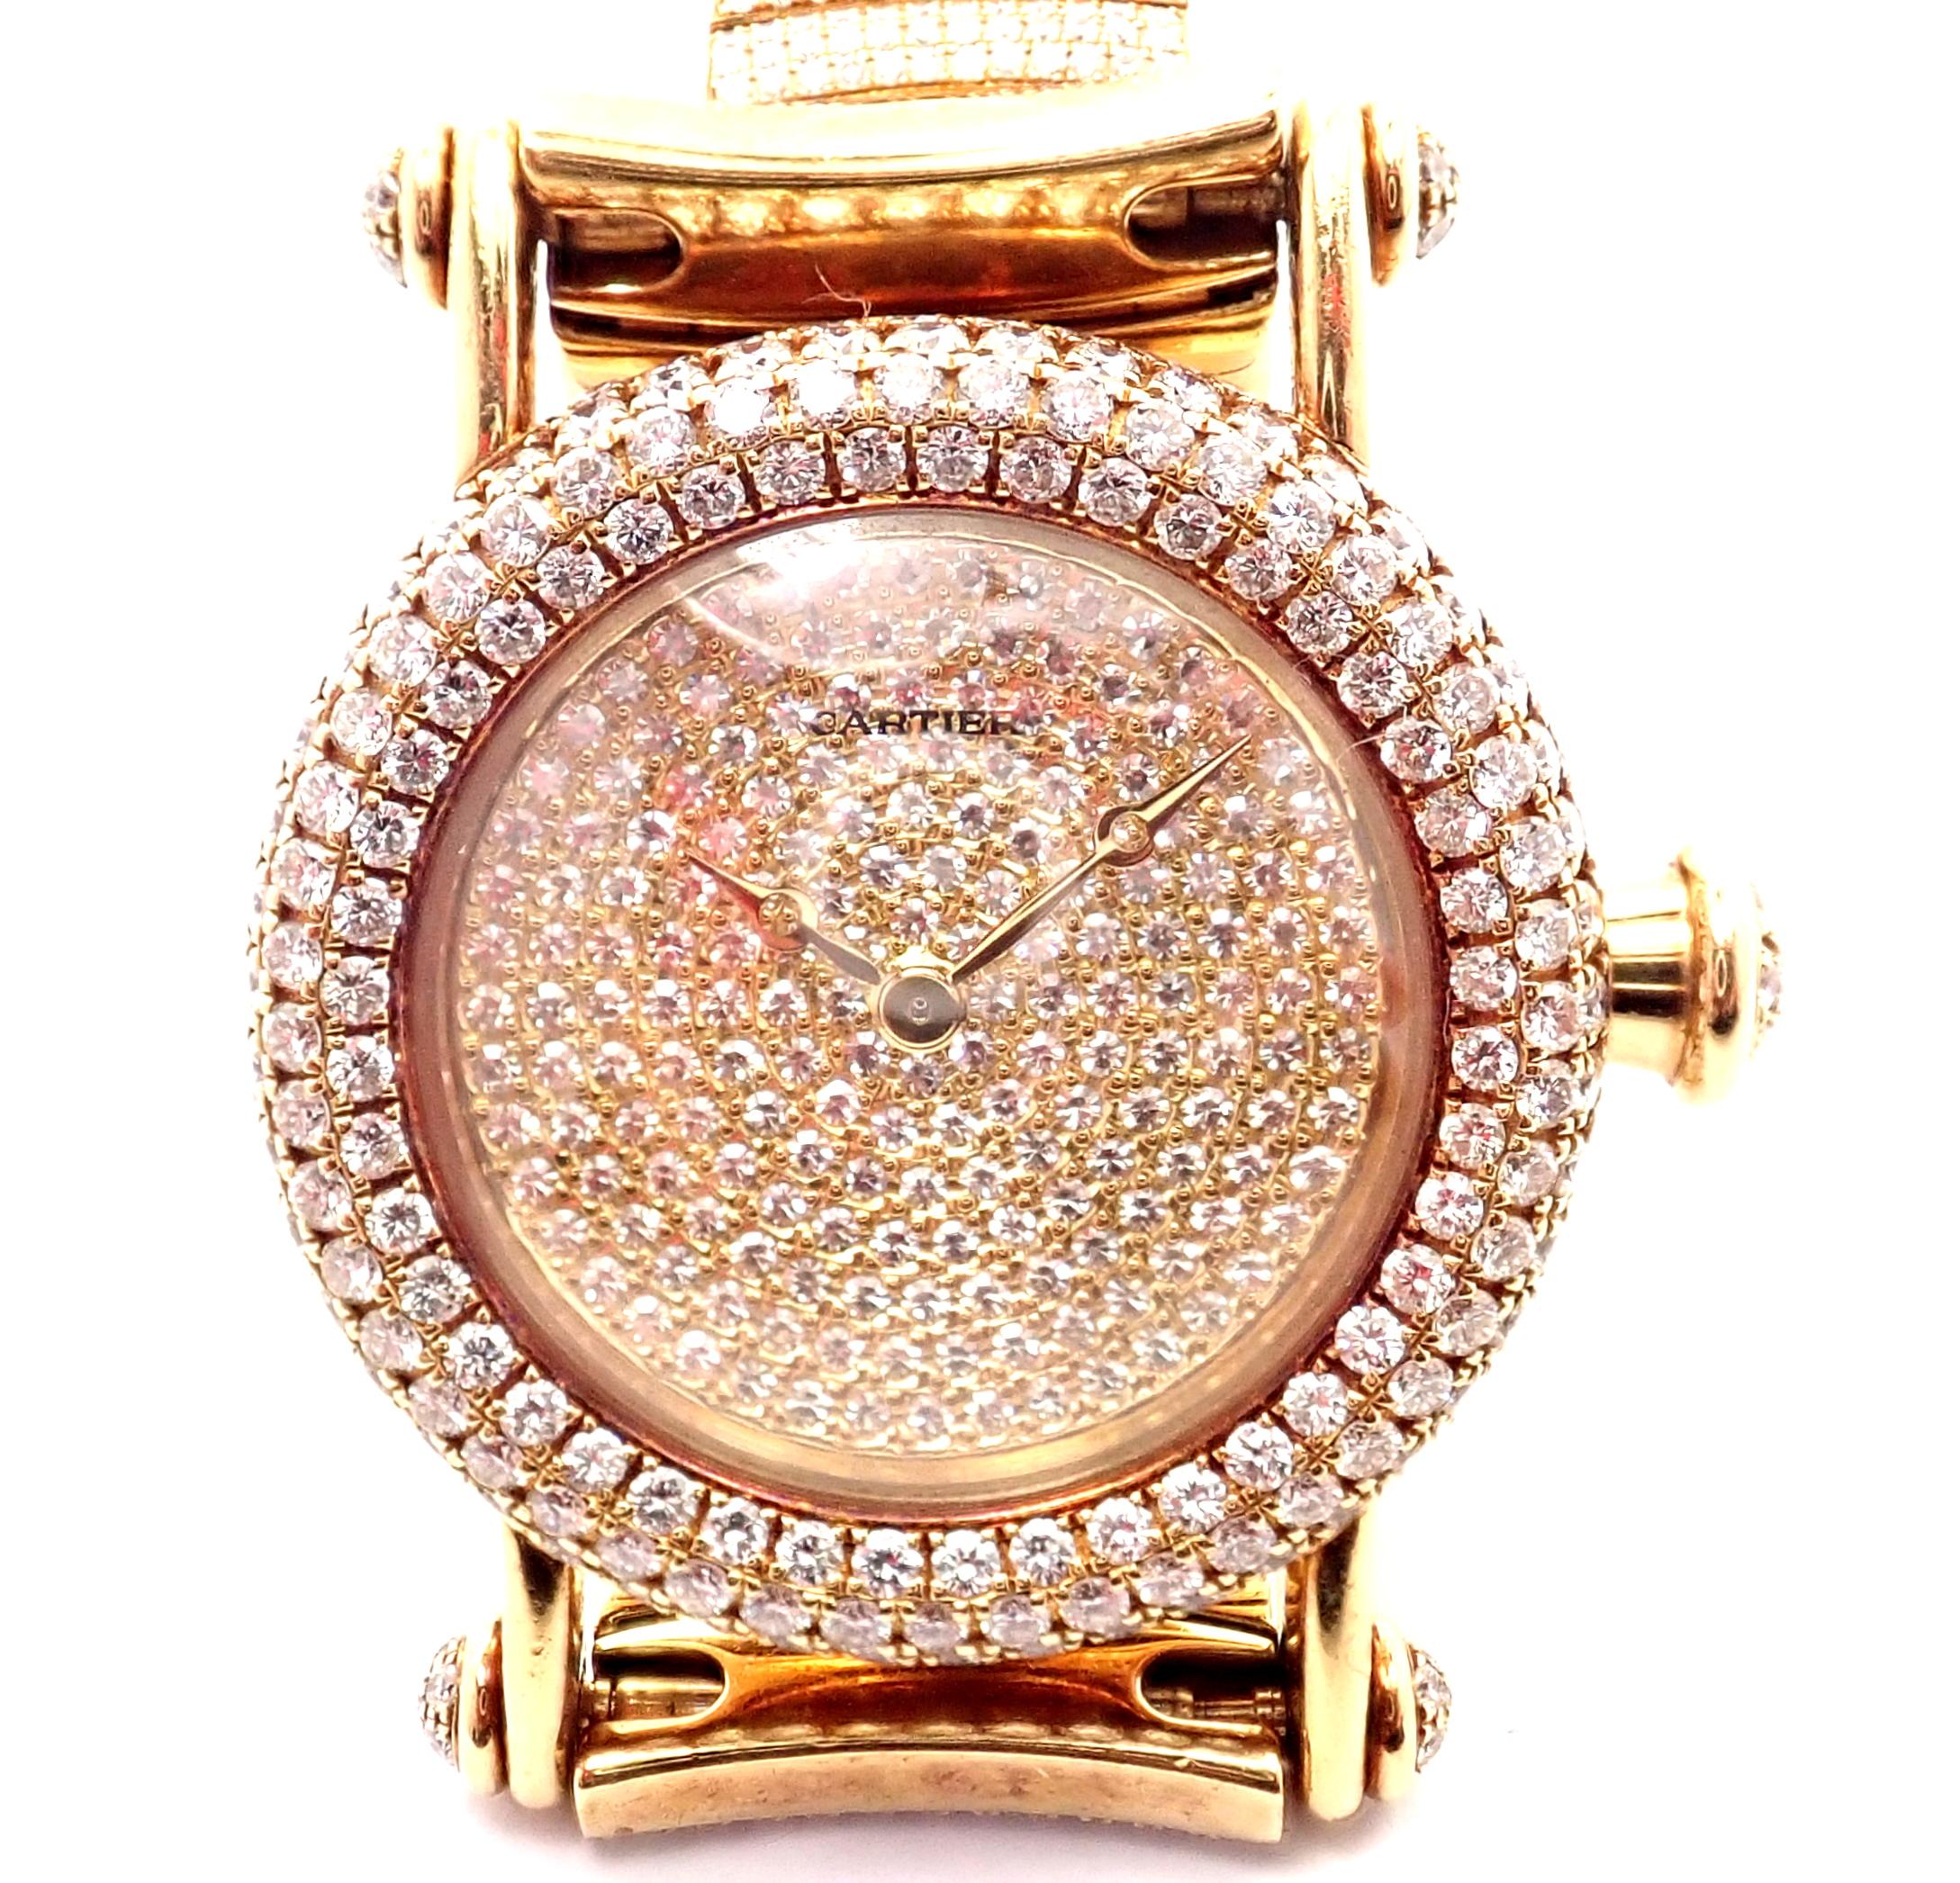 18k Yellow Gold 15ct Pave Diamond Diabolo Wristwatch by Cartier 1450.
With Round Brilliant Cut Diamonds VS1 clarity, E color total weight approximately 15ct
Brand: Cartier
Style Number: Diabolo 1450
Case Material: 18k Yellow Gold with Diamonds
Dial